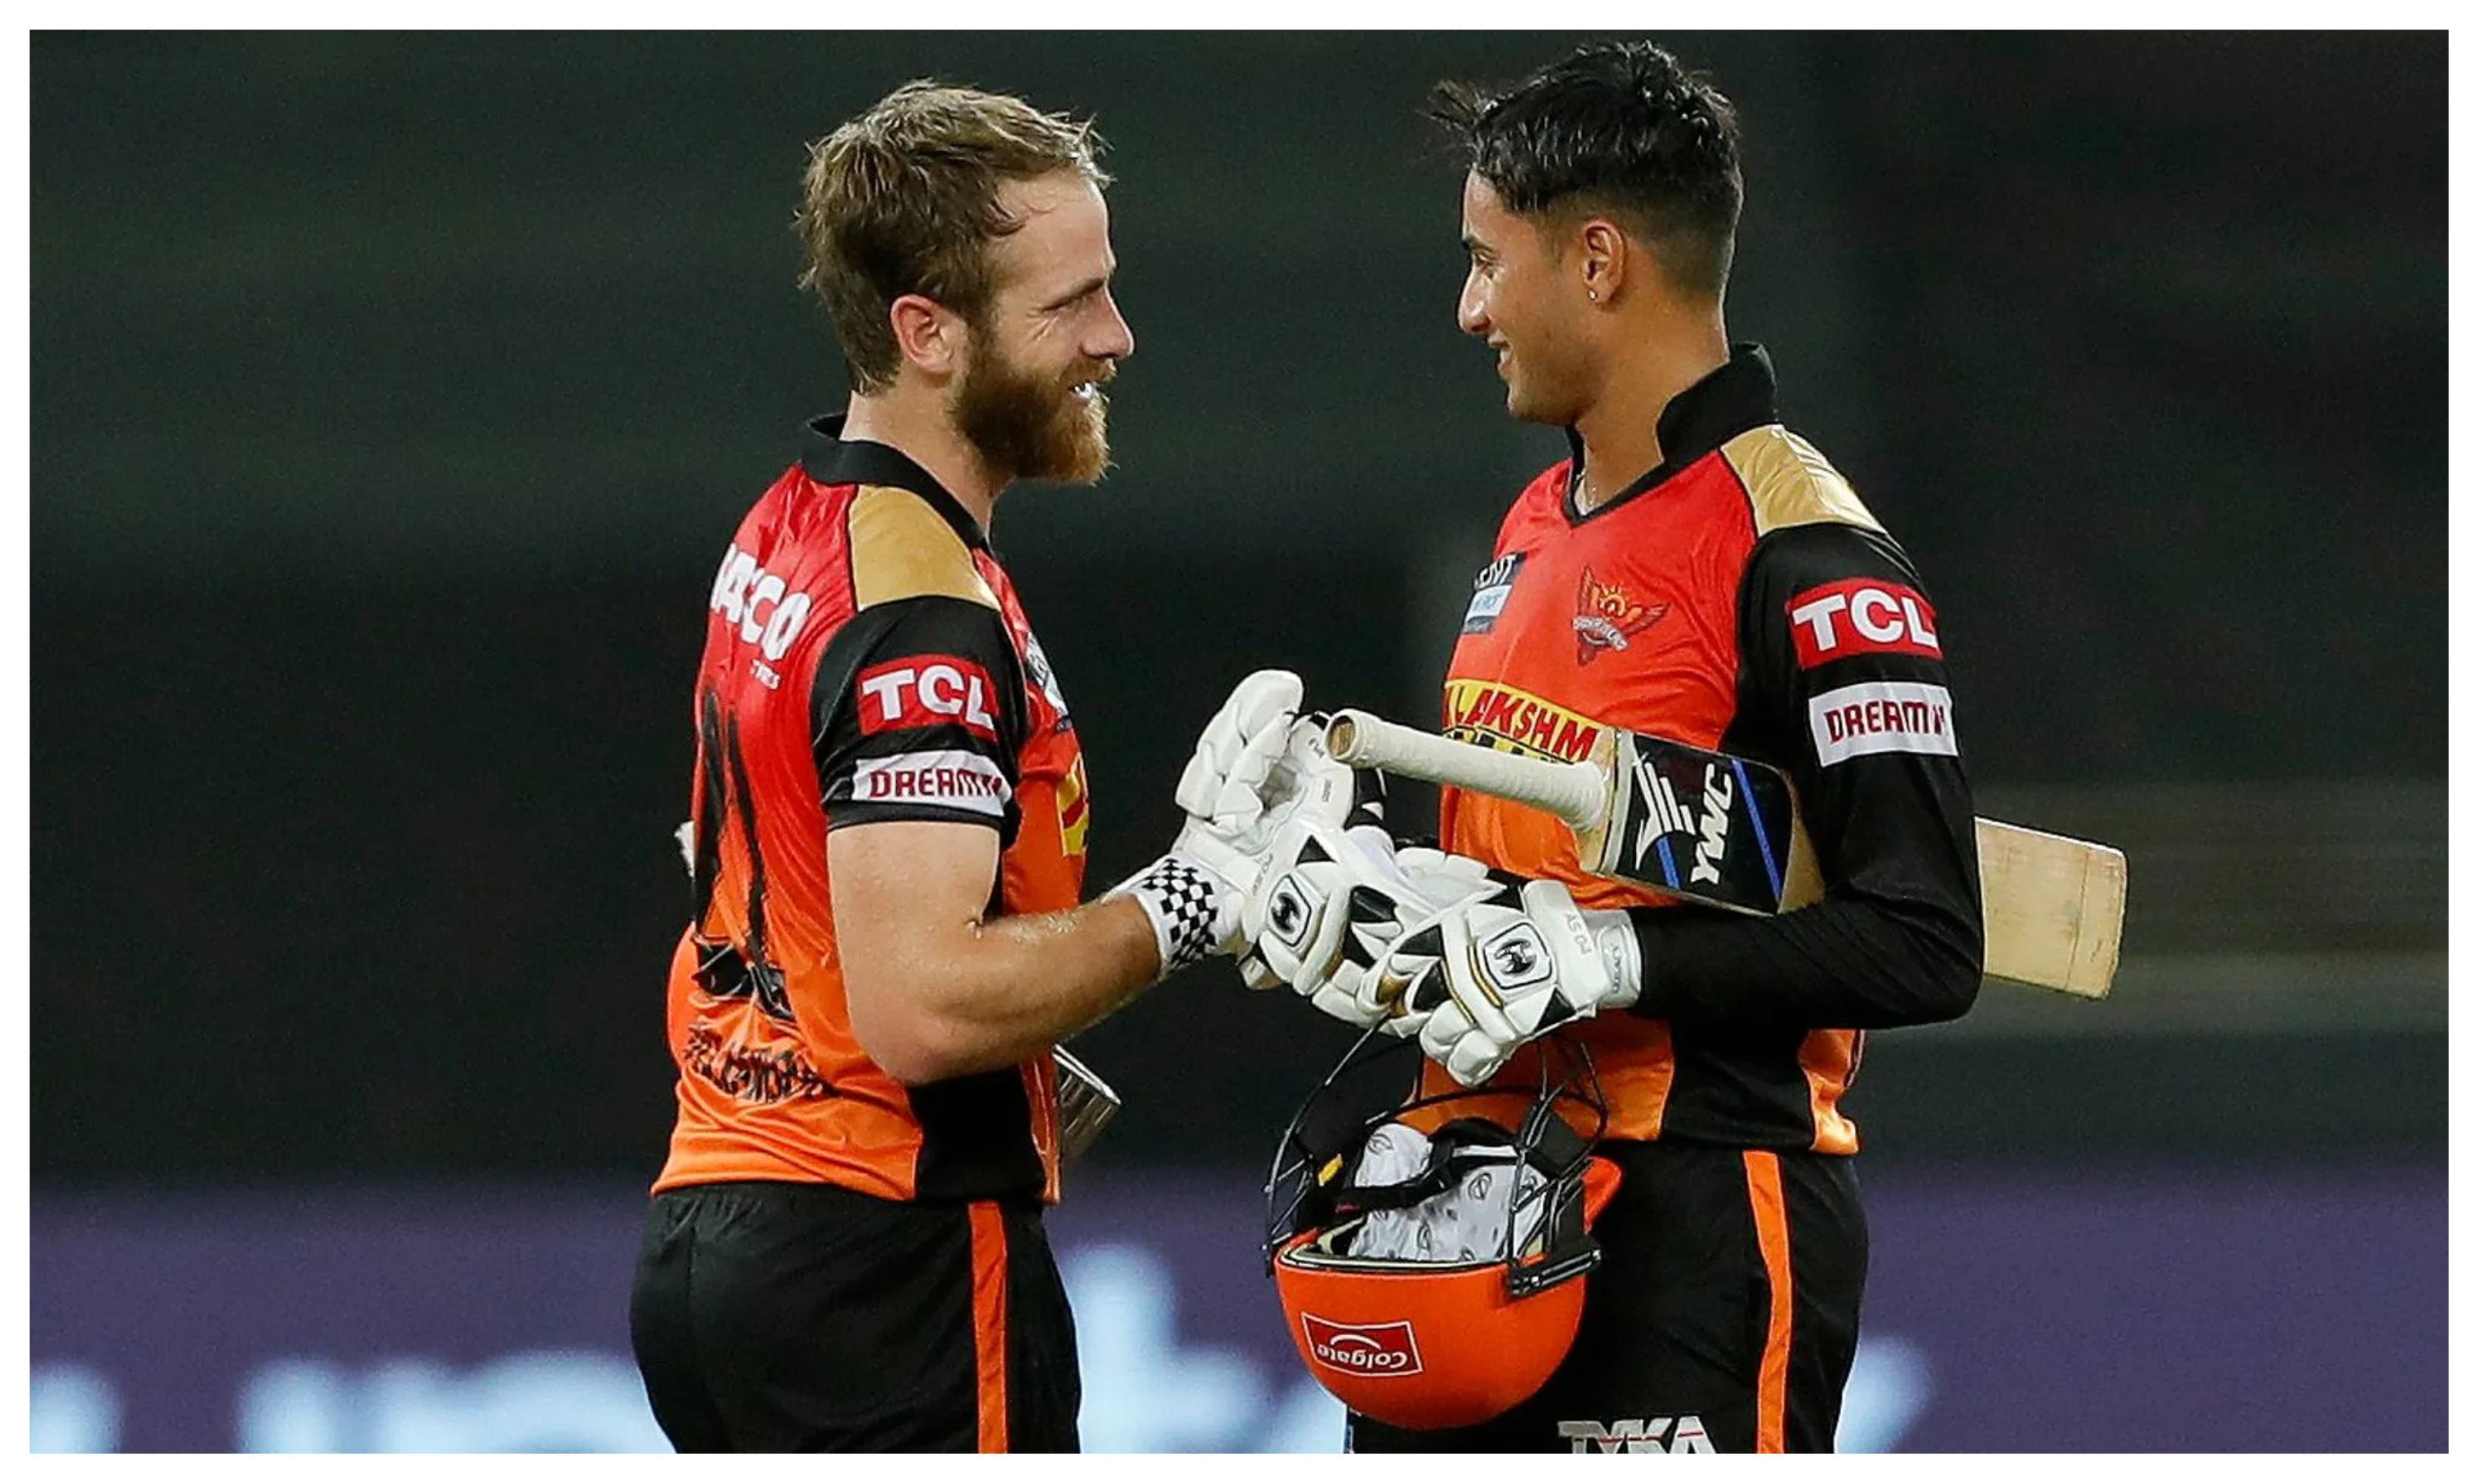 SRH registered their second win in this year's IPL | BCCI/IPL